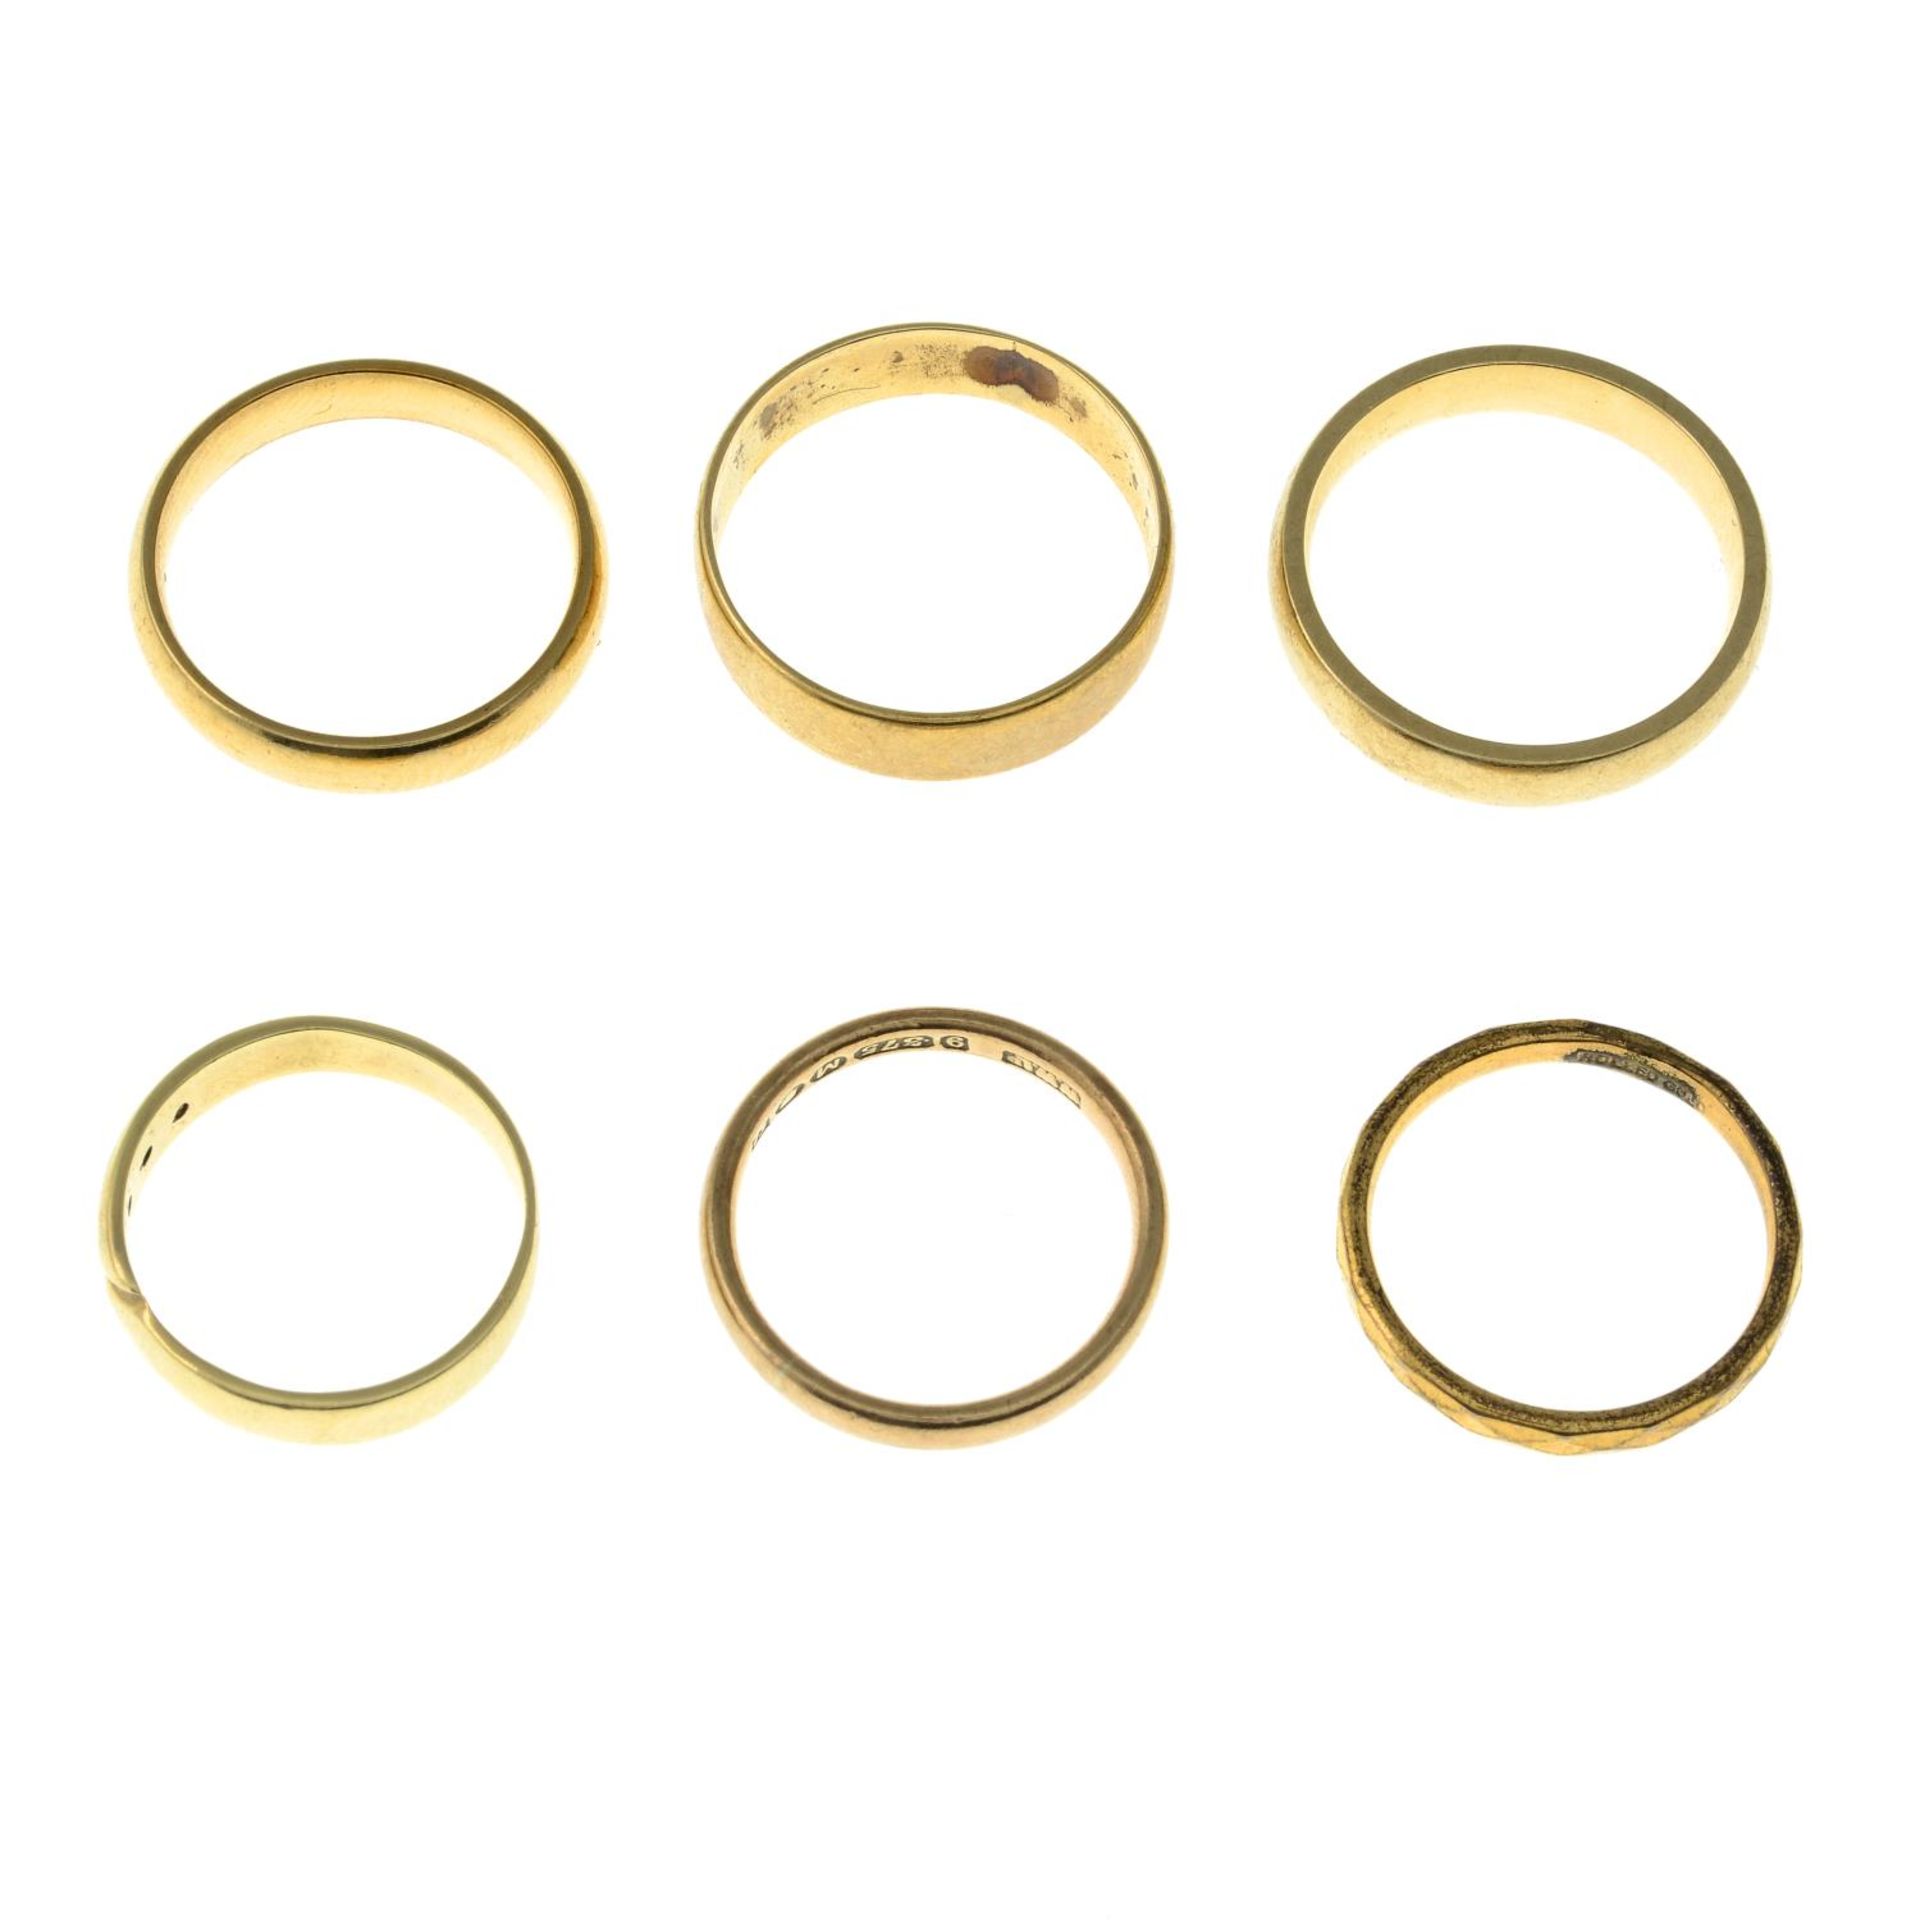 Four 9ct gold band rings, hallmarks for 9ct gold, ring sizes K to P, 12.4gms. - Image 2 of 2